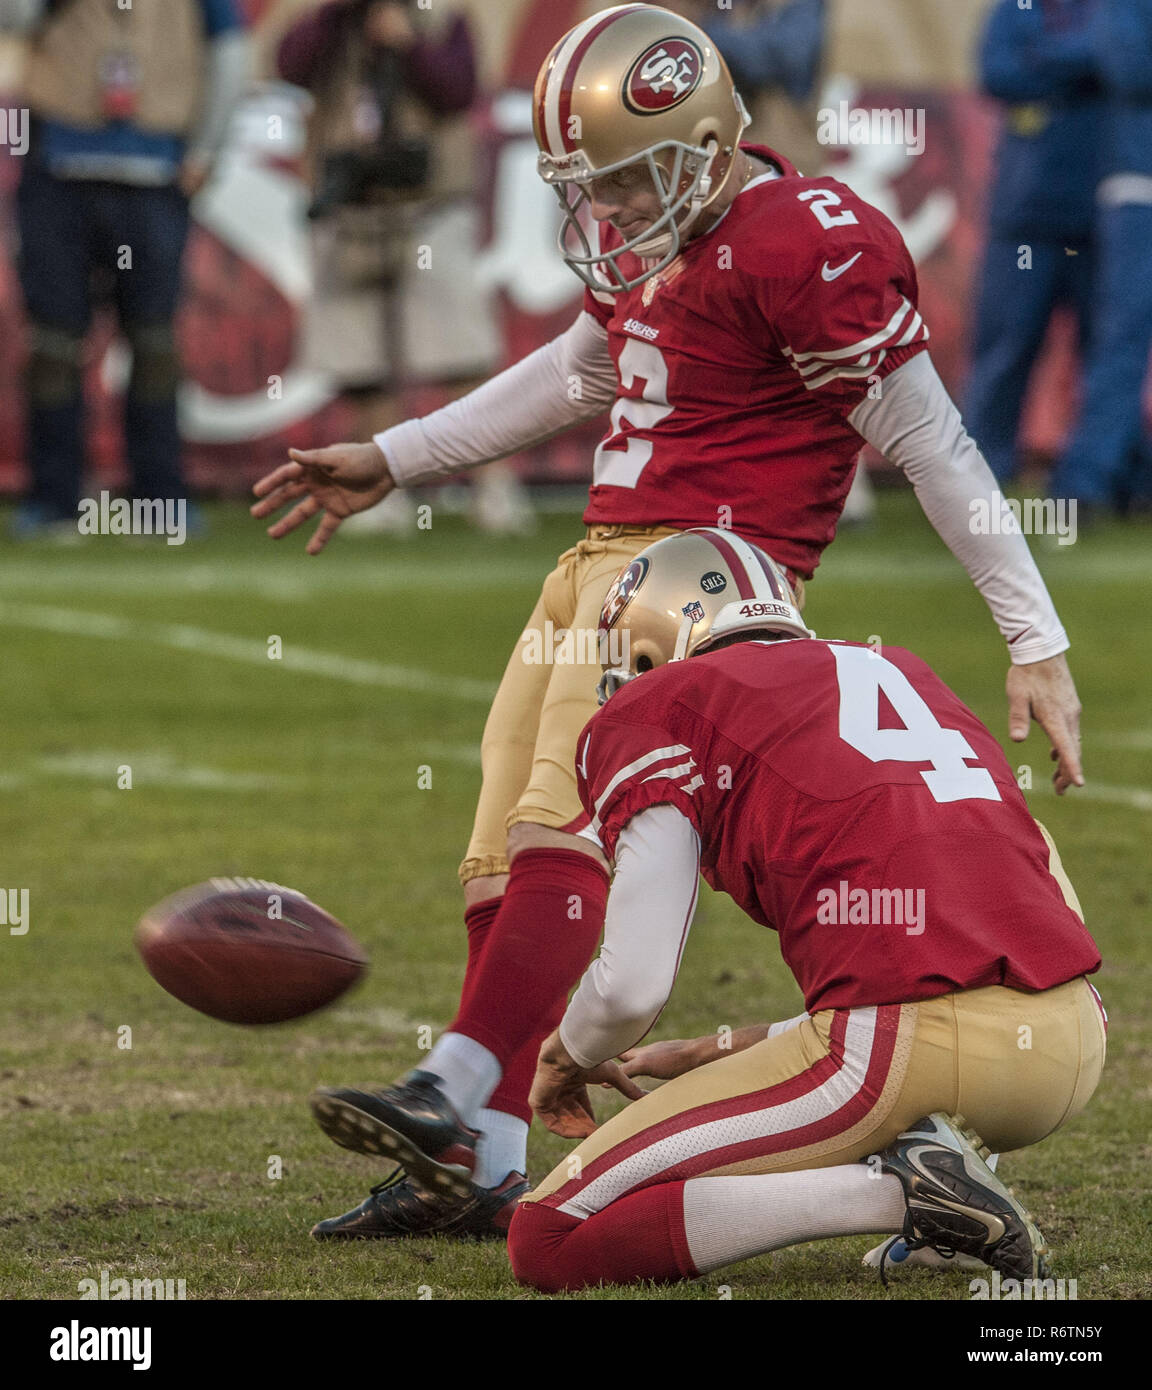 San Francisco, California, USA. 30th Dec, 2012. With San Francisco 49ers punter Andy Lee (4) holding kicker David Akers (2) misses field goal on Sunday, December 30, 2012 at Candlestick Park, San Francisco, California. The 49ers defeated the Cardinals 27-13. Credit: Al Golub/ZUMA Wire/Alamy Live News Stock Photo